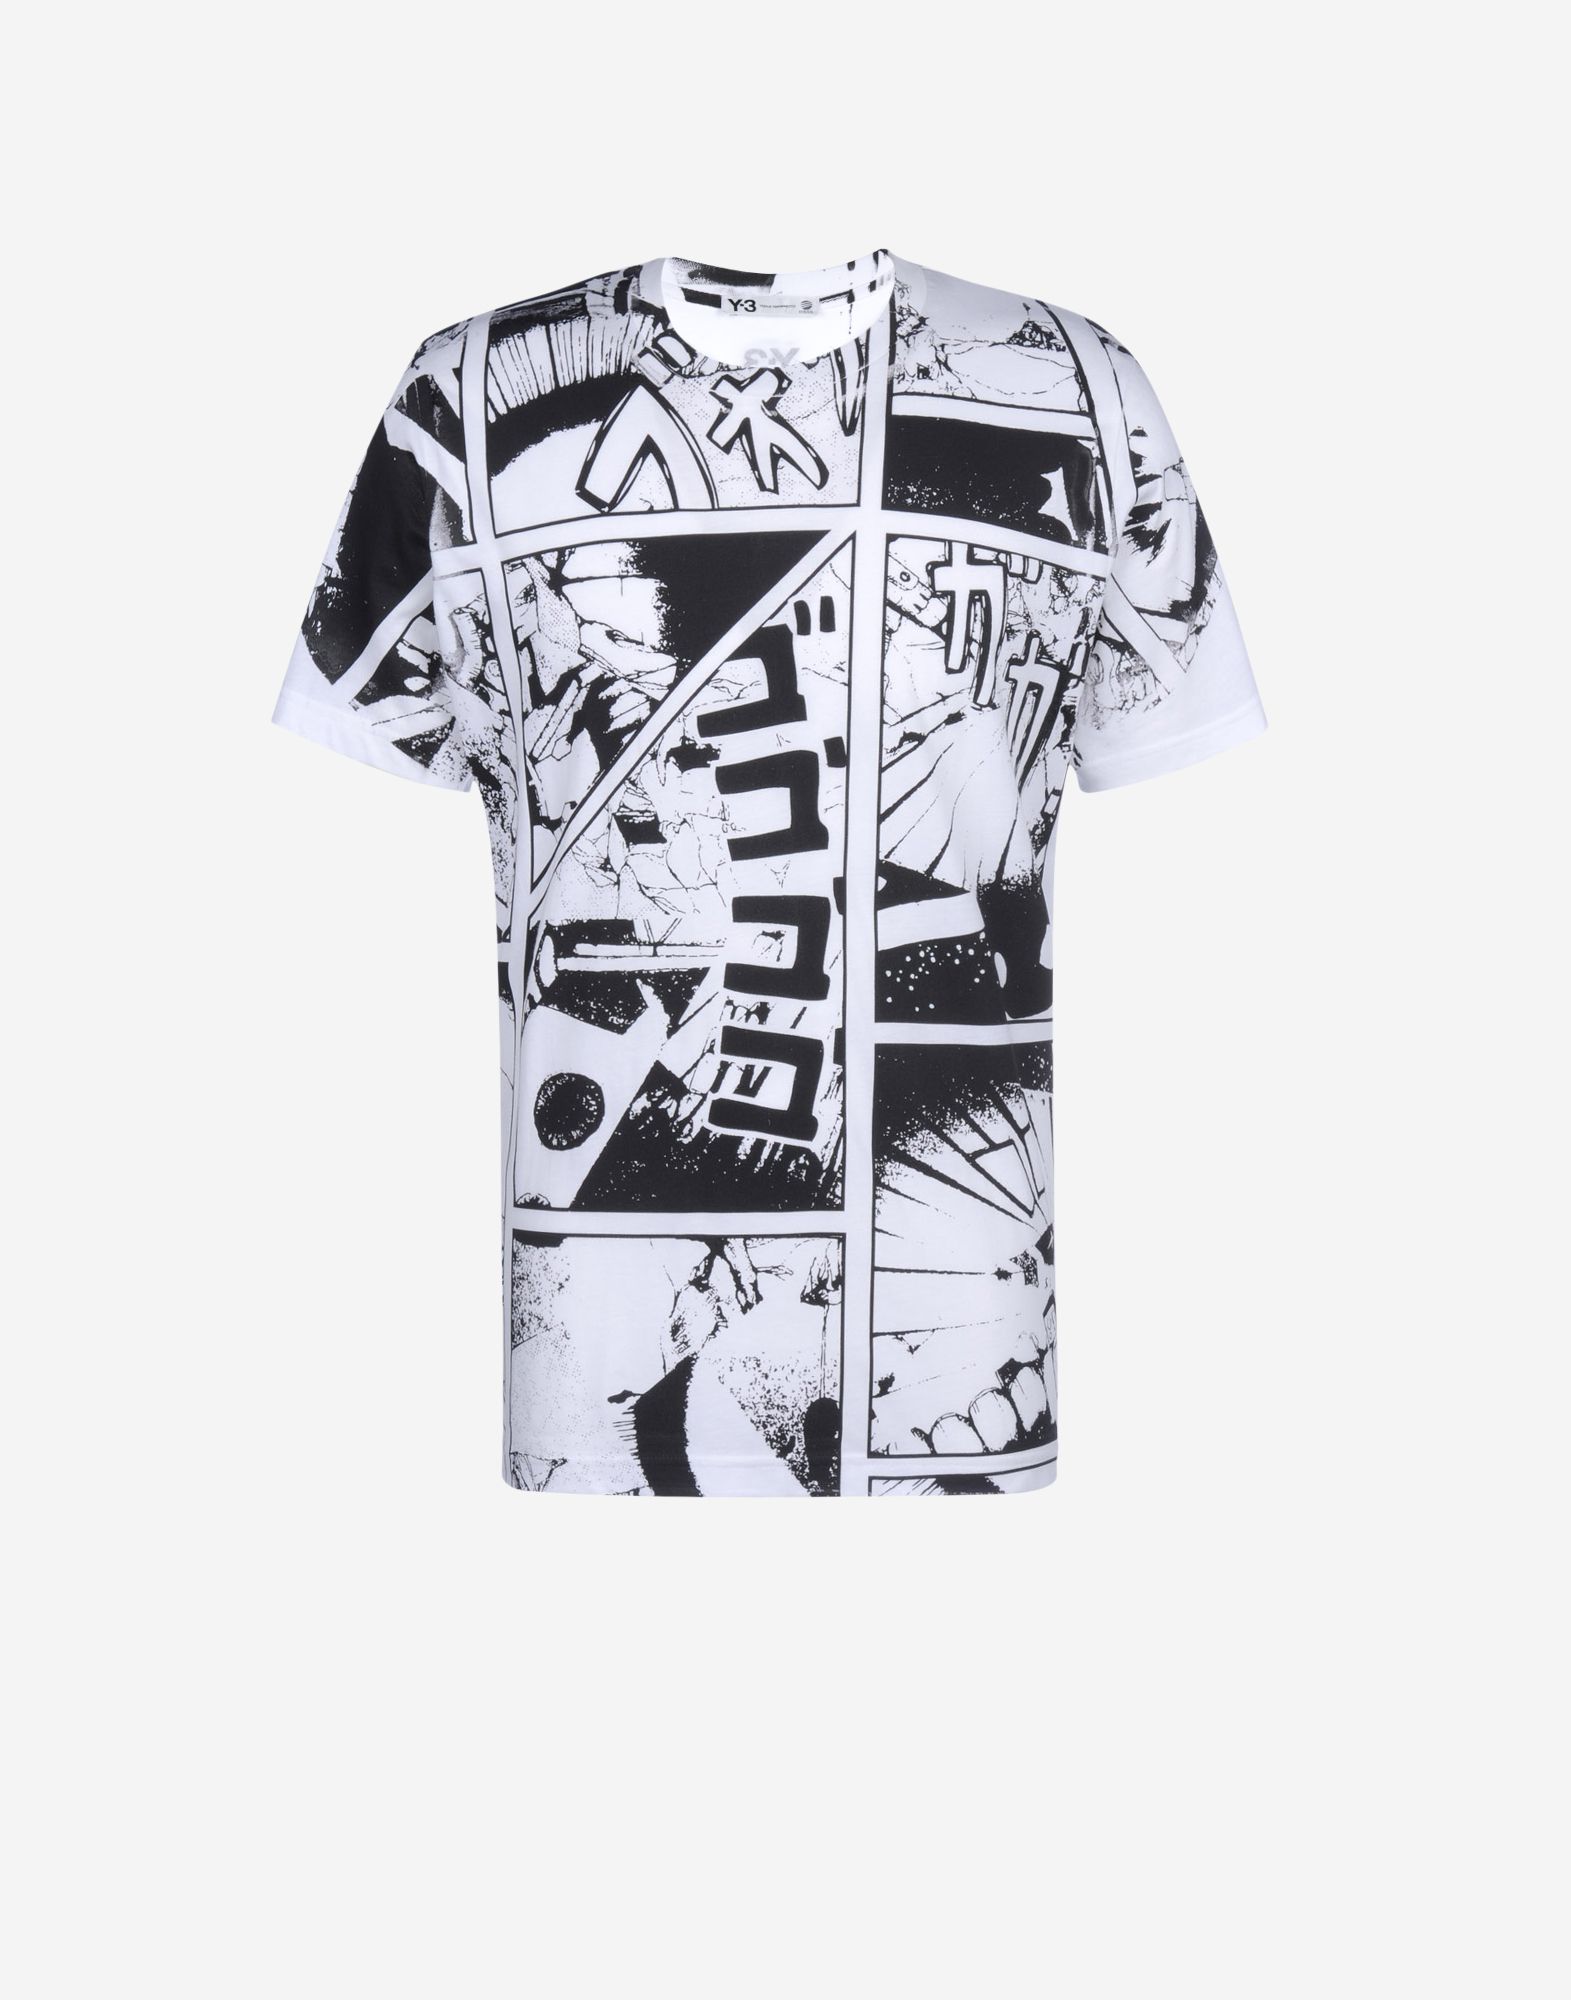 Y 3 Manga Print Tee for Men | Adidas Y-3 Official Store